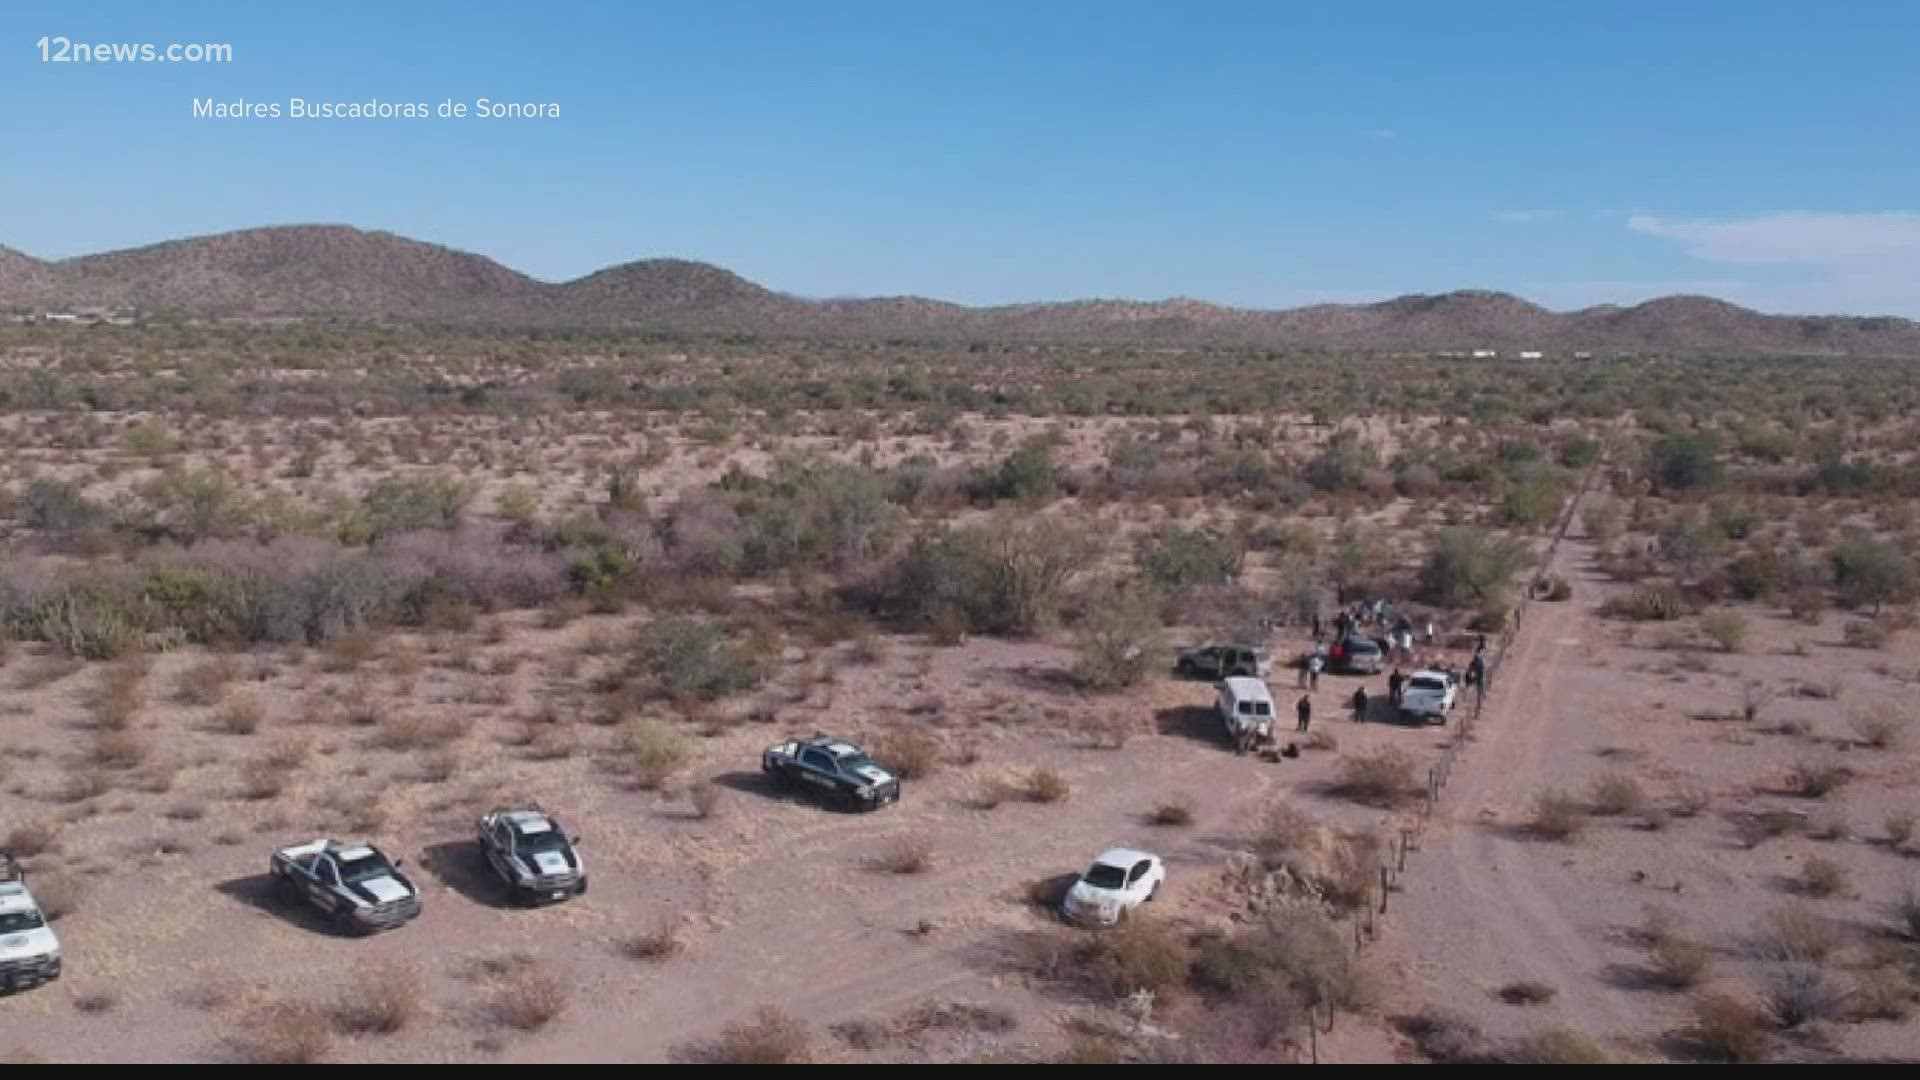 Mexican authorities say they have found 14 clandestine graves in the northern border state of Sonora.